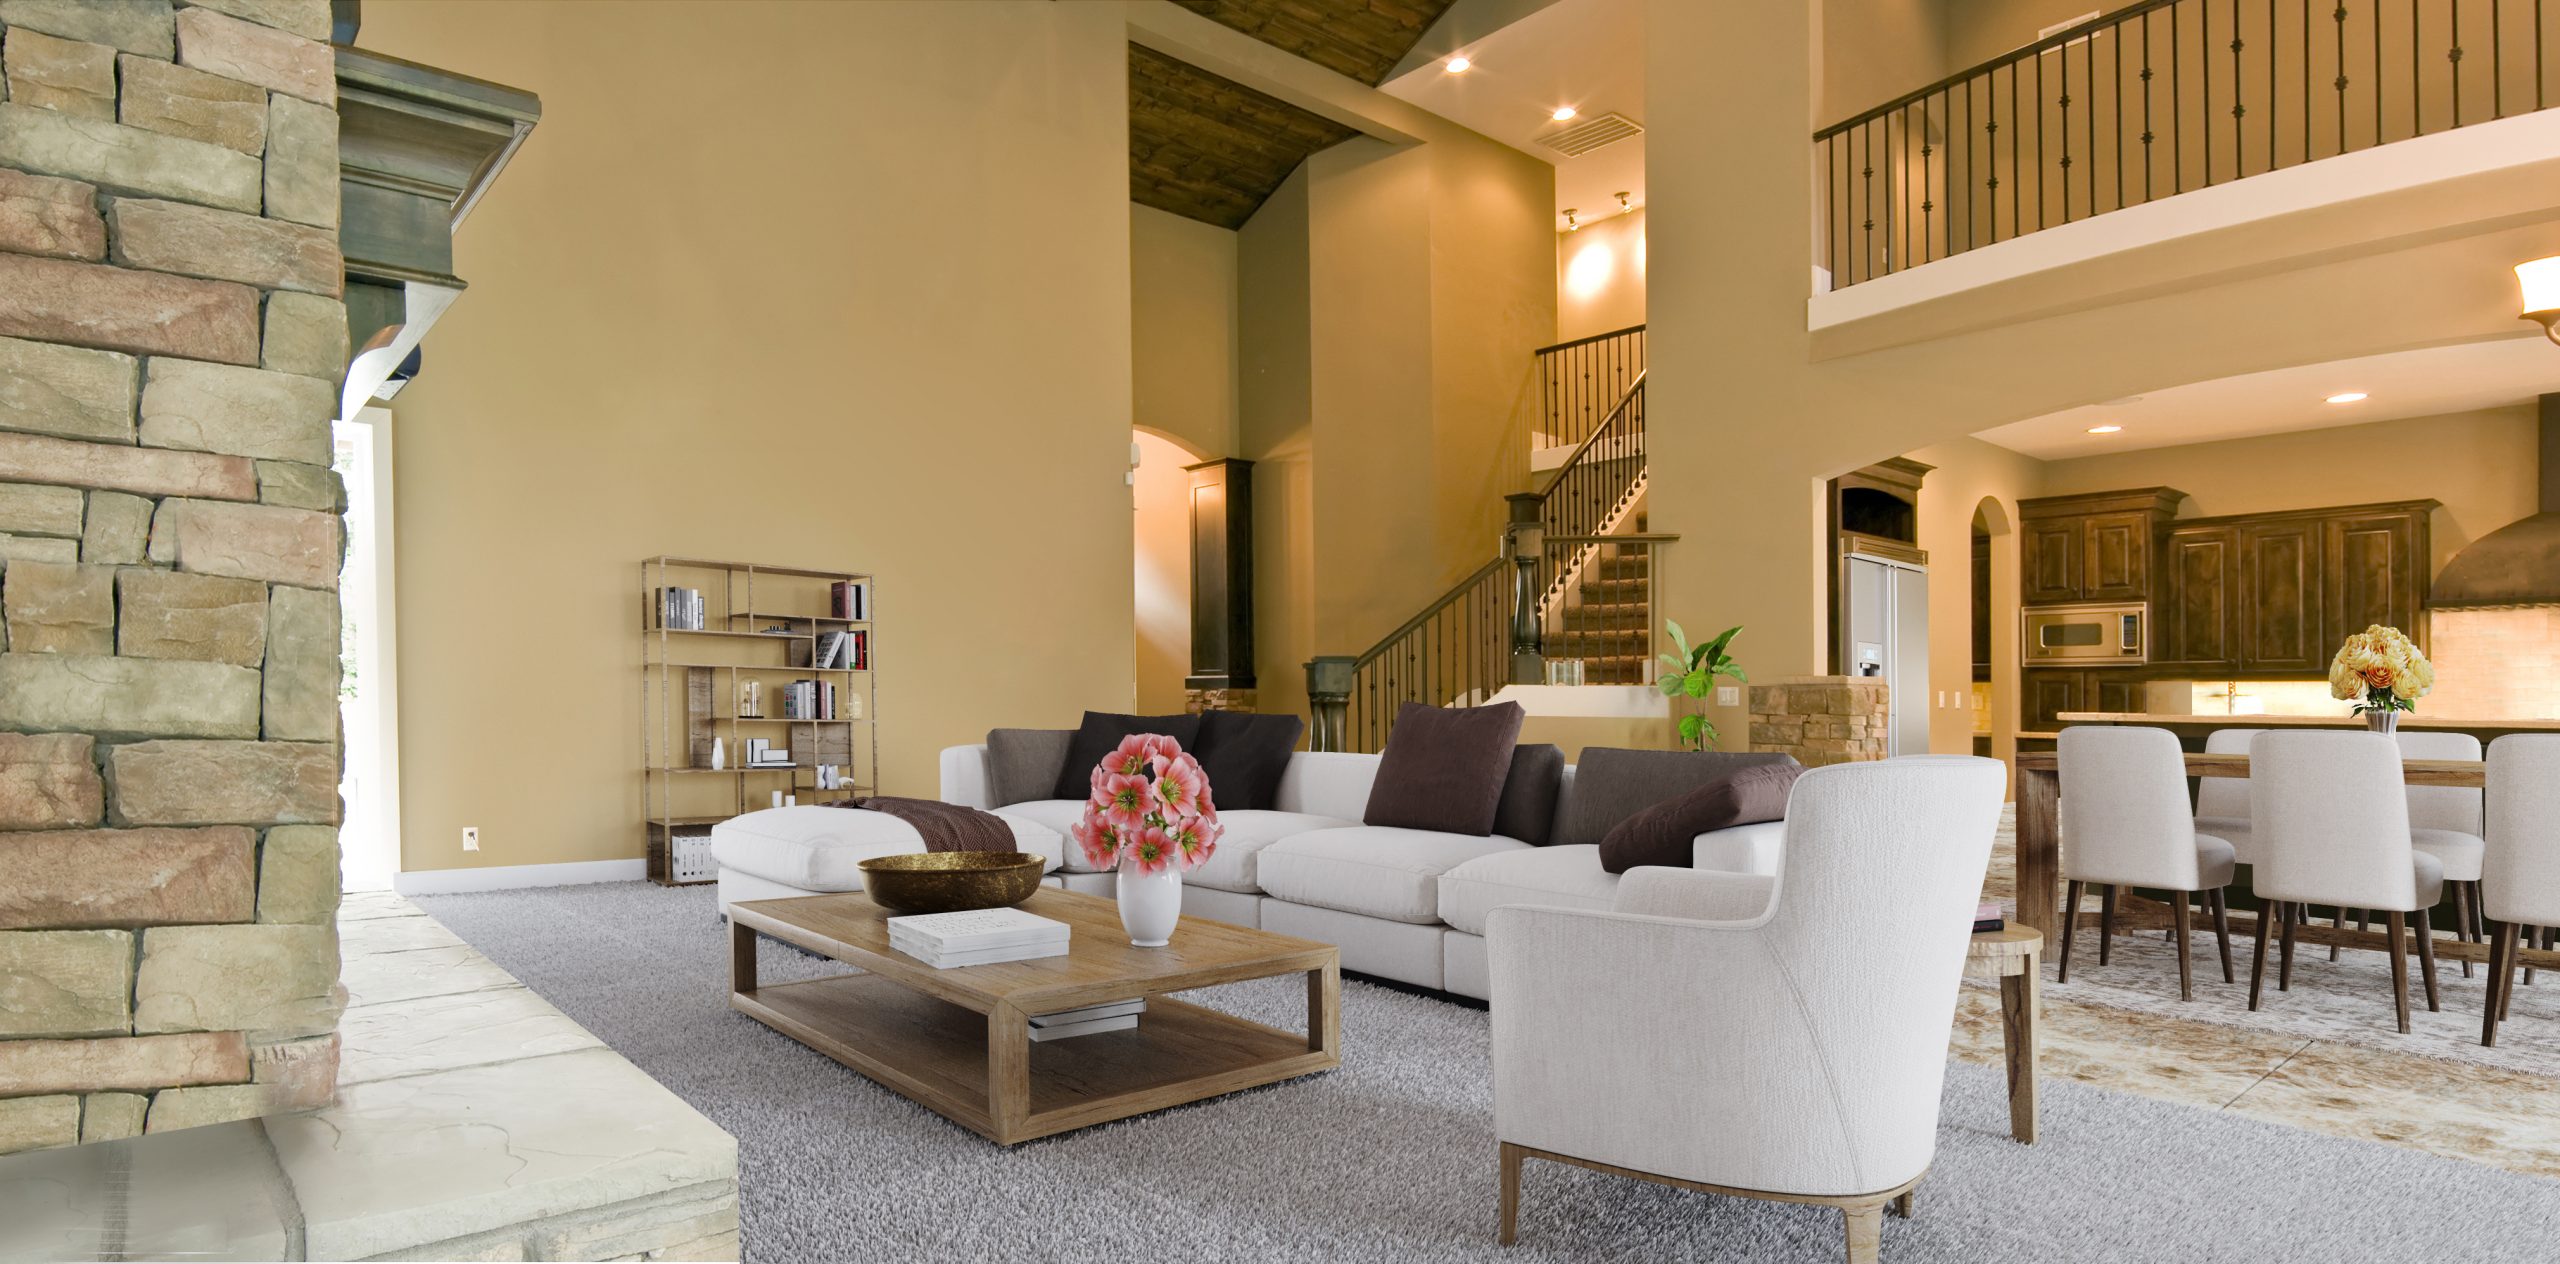 Transformation - Living Room Panorama in Luxury Home